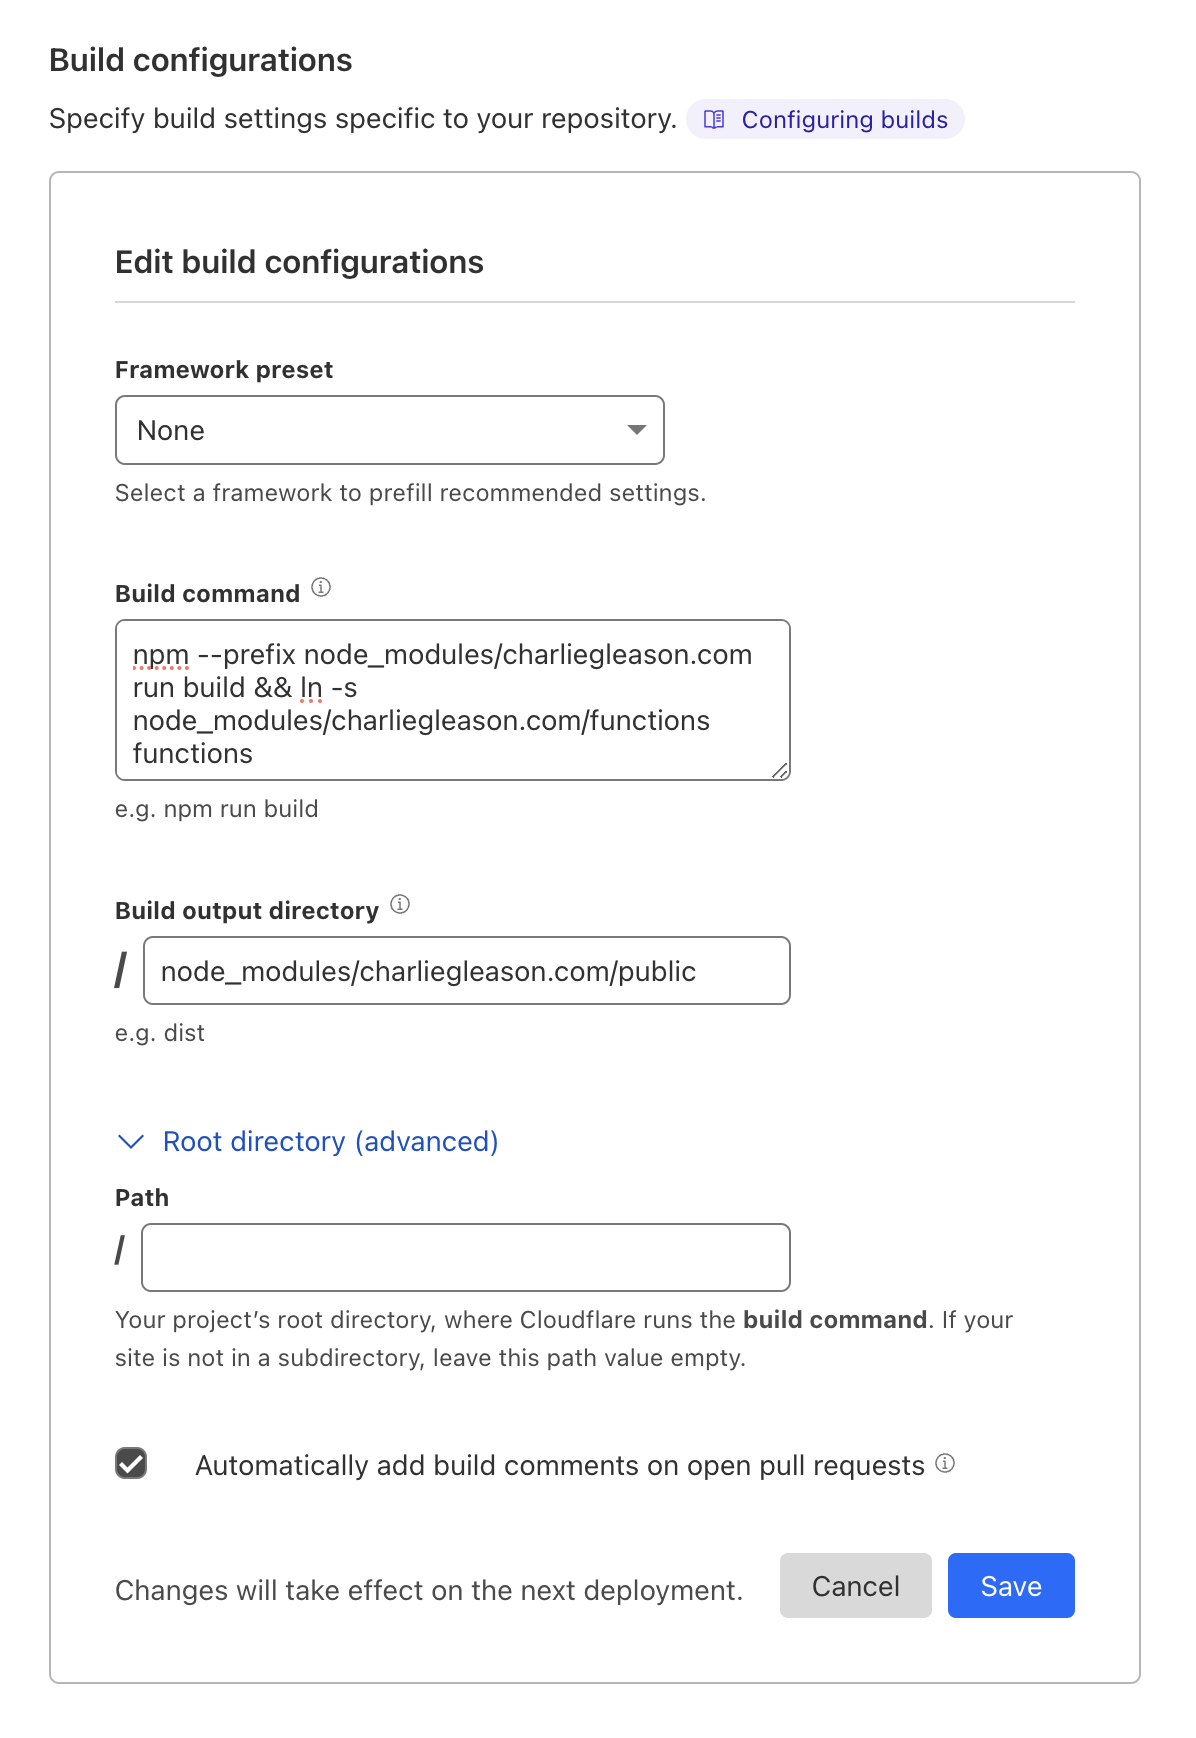 A screenshot of the Cloudflare interface for defining deployment settings